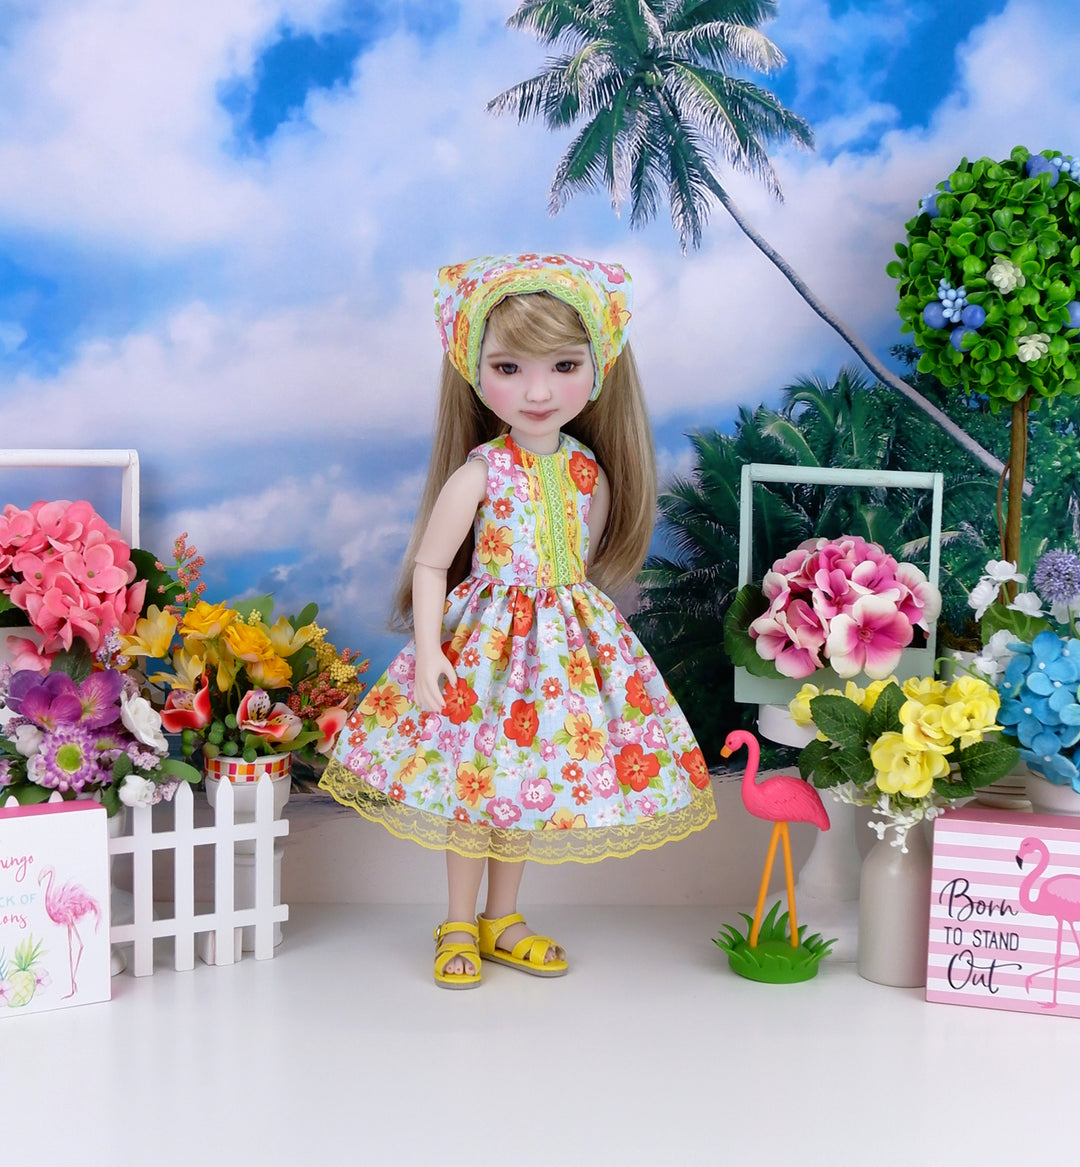 Honolulu Blooms - dress with sandals for Ruby Red Fashion Friends doll